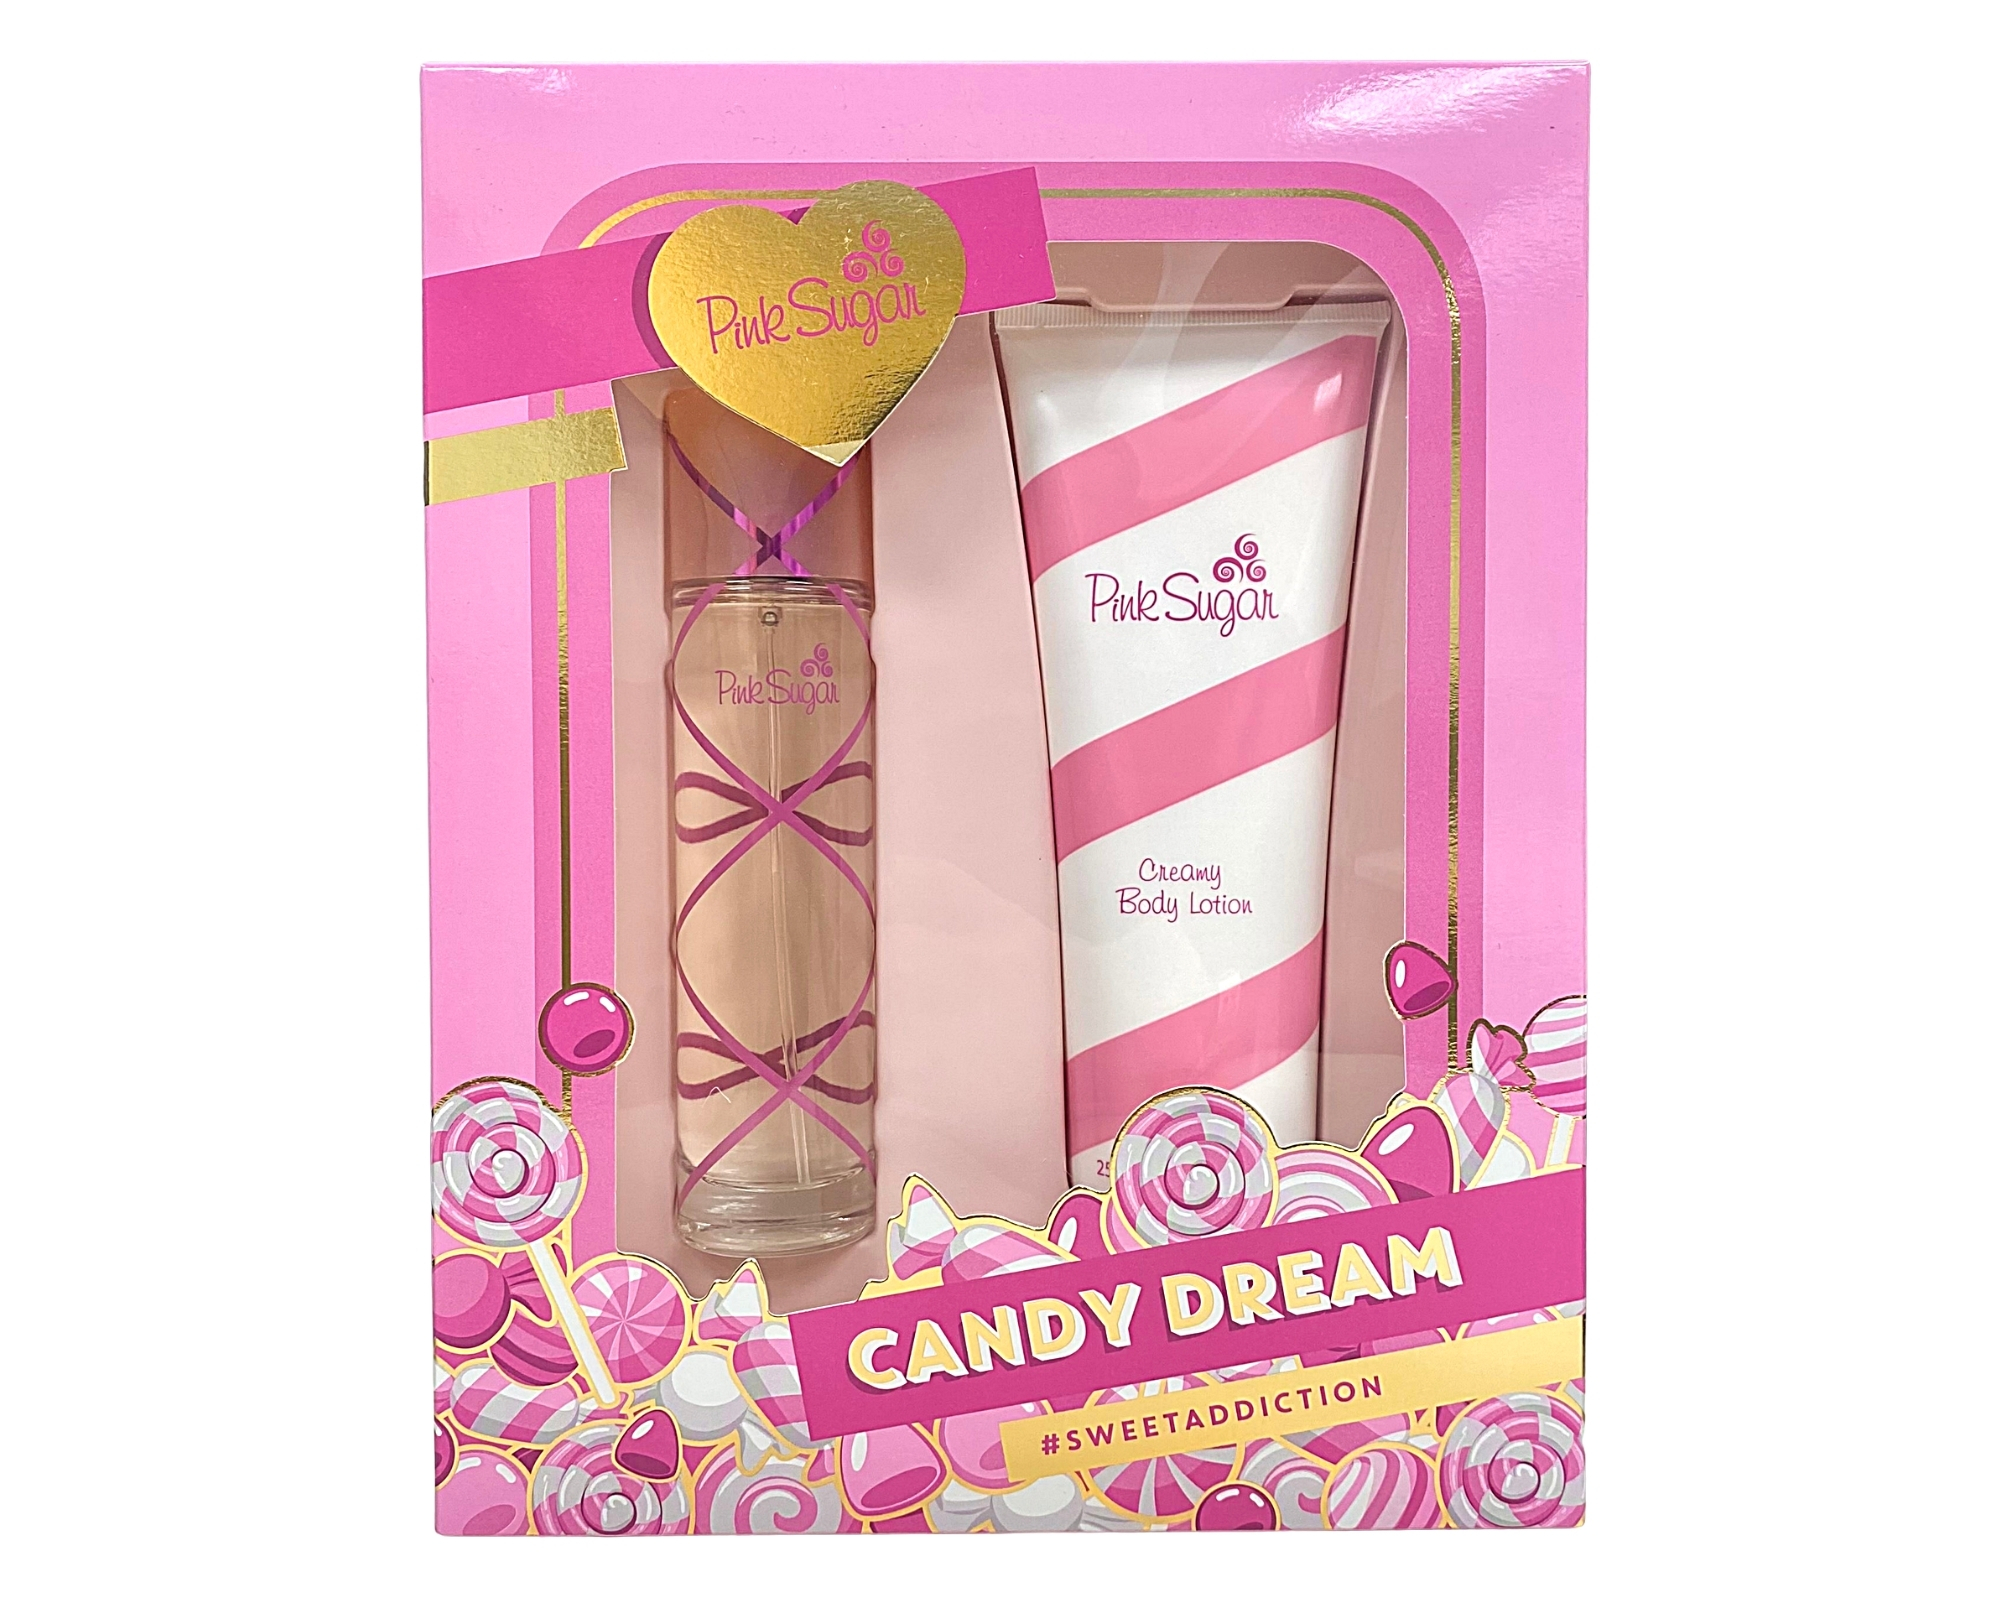 Pink Sugar by Aquolina, 2 Piece Gift Set for Women